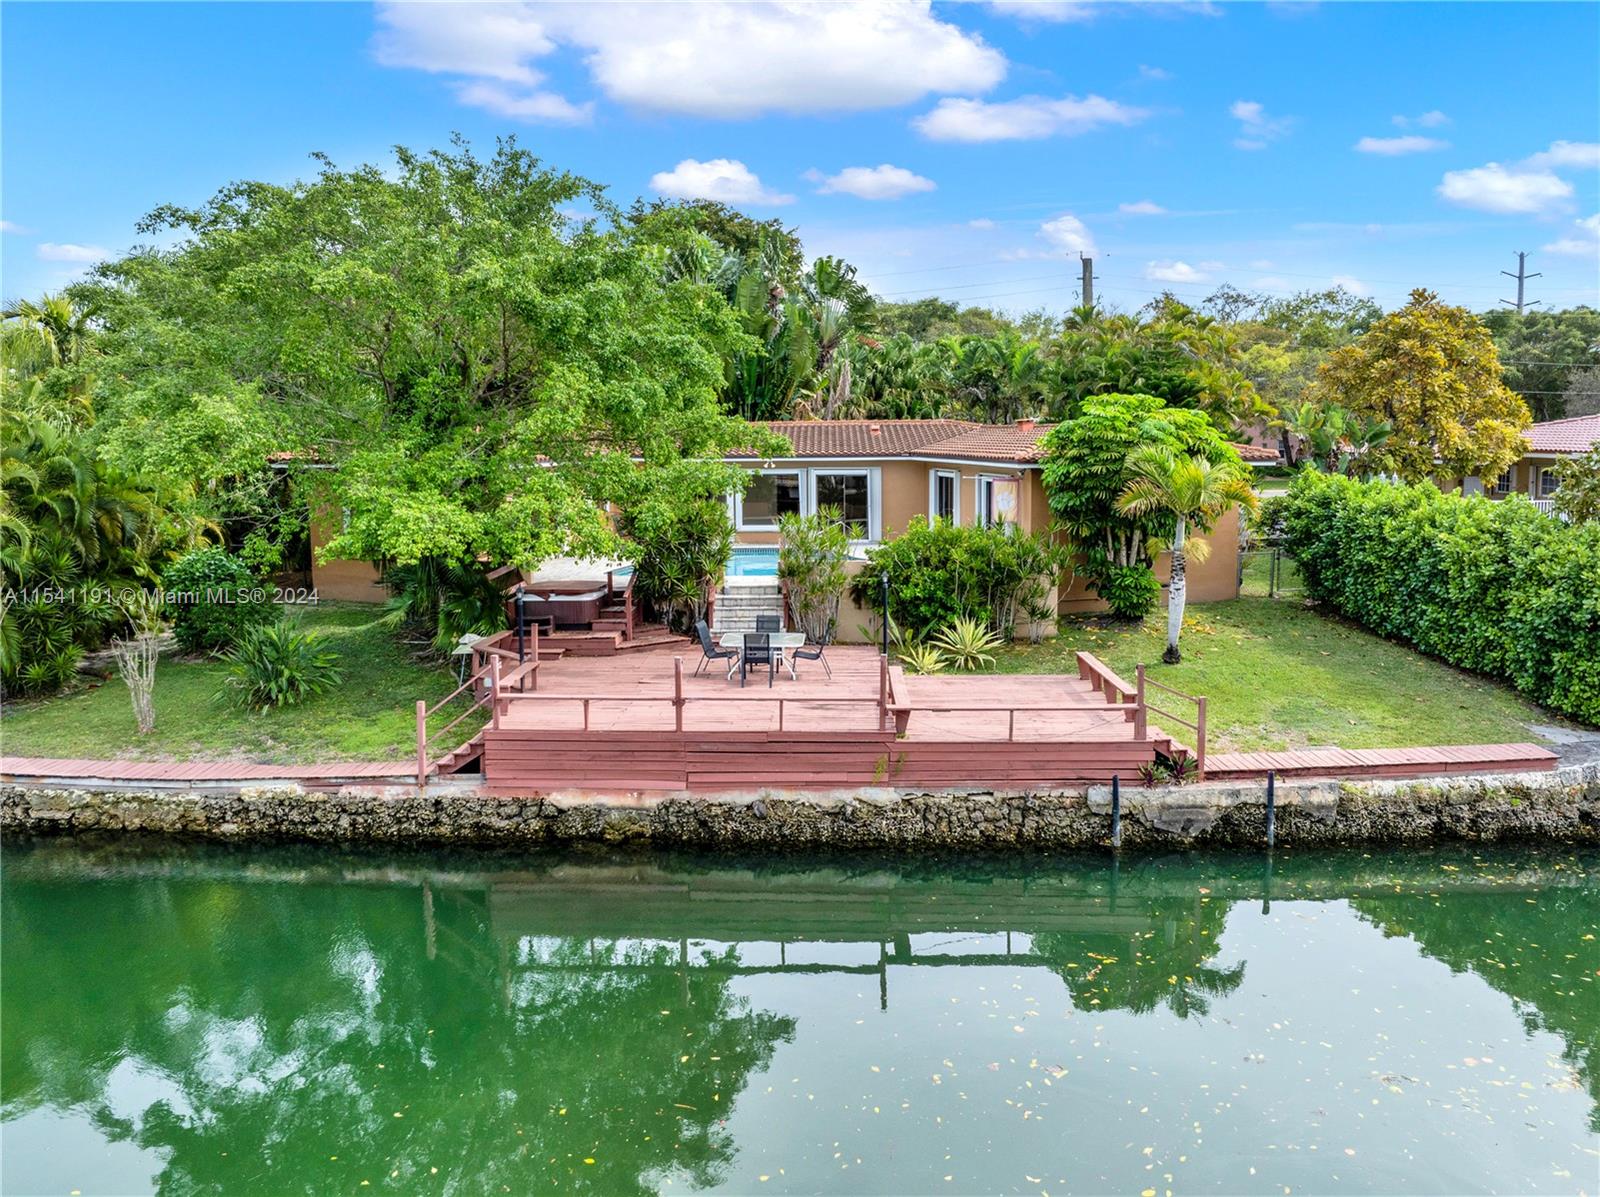 Nestled in Coral Gables, the City Beautiful, this 4/4 home is a true gem, offering waterfront living with a distinctive heart-shaped pool. Perfectly positioned near US1, it provides convenient access to the University of Miami, top-rated schools, Whole Foods, and Miami International Airport. Updated in 2017 with a new roof and a kitchen refresh in 2005, this residence combines comfort with charm. The private deck and recently maintained seawall further elevate the outdoor living experience, making this property not just a home but a sanctuary in one of South Florida's most sought-after locations.